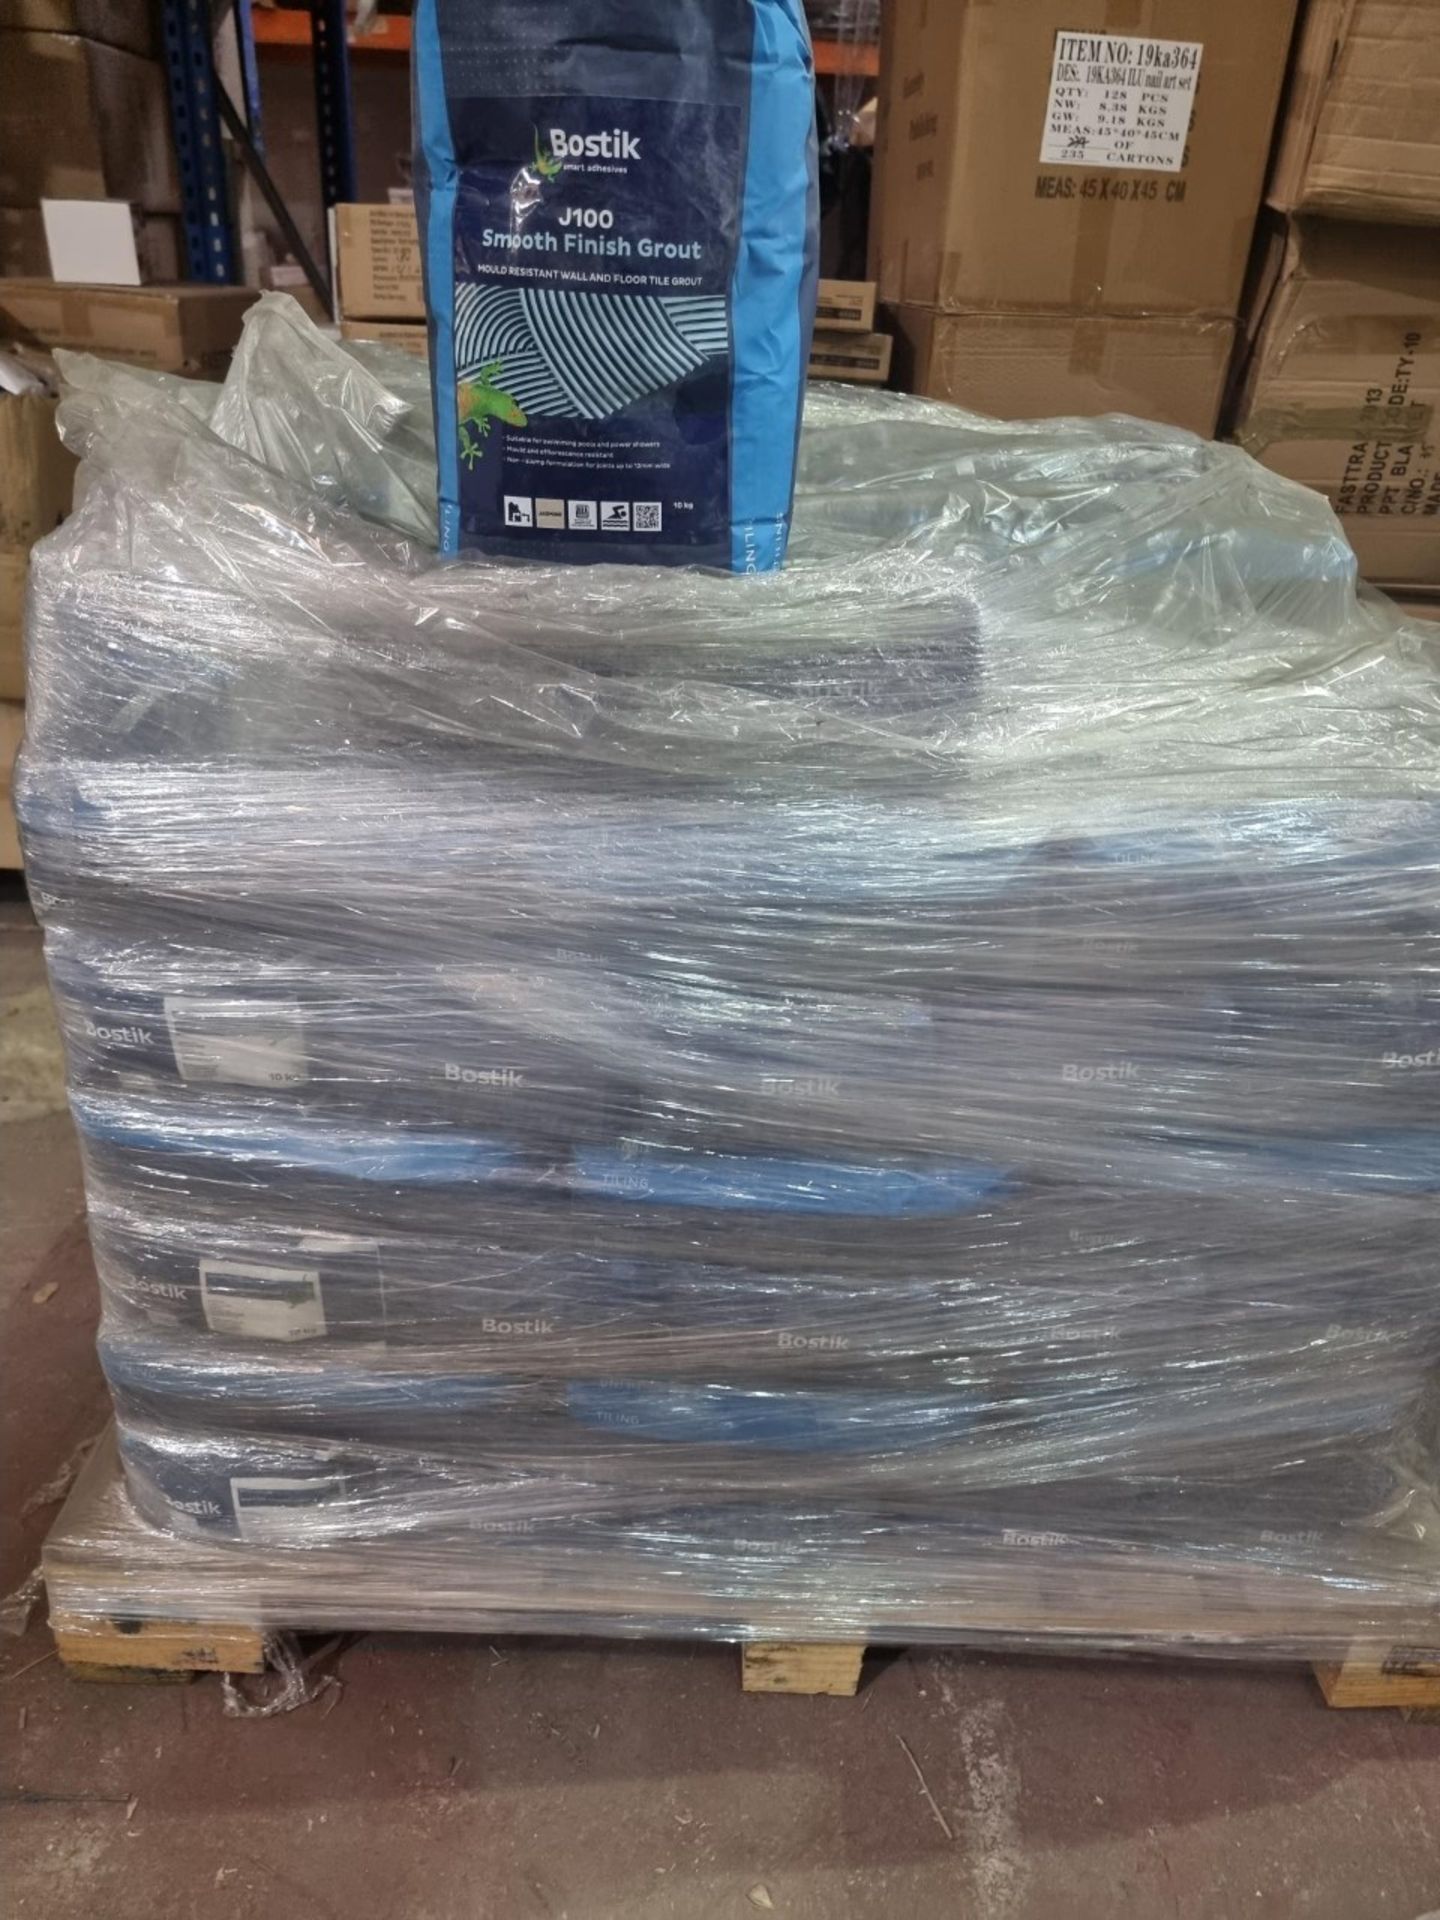 (E125) PALLET TO CONTAIN 96 x 10KG BAGS OF BOSTIK J100 SMOOTH FINISH GROUT - Image 2 of 2